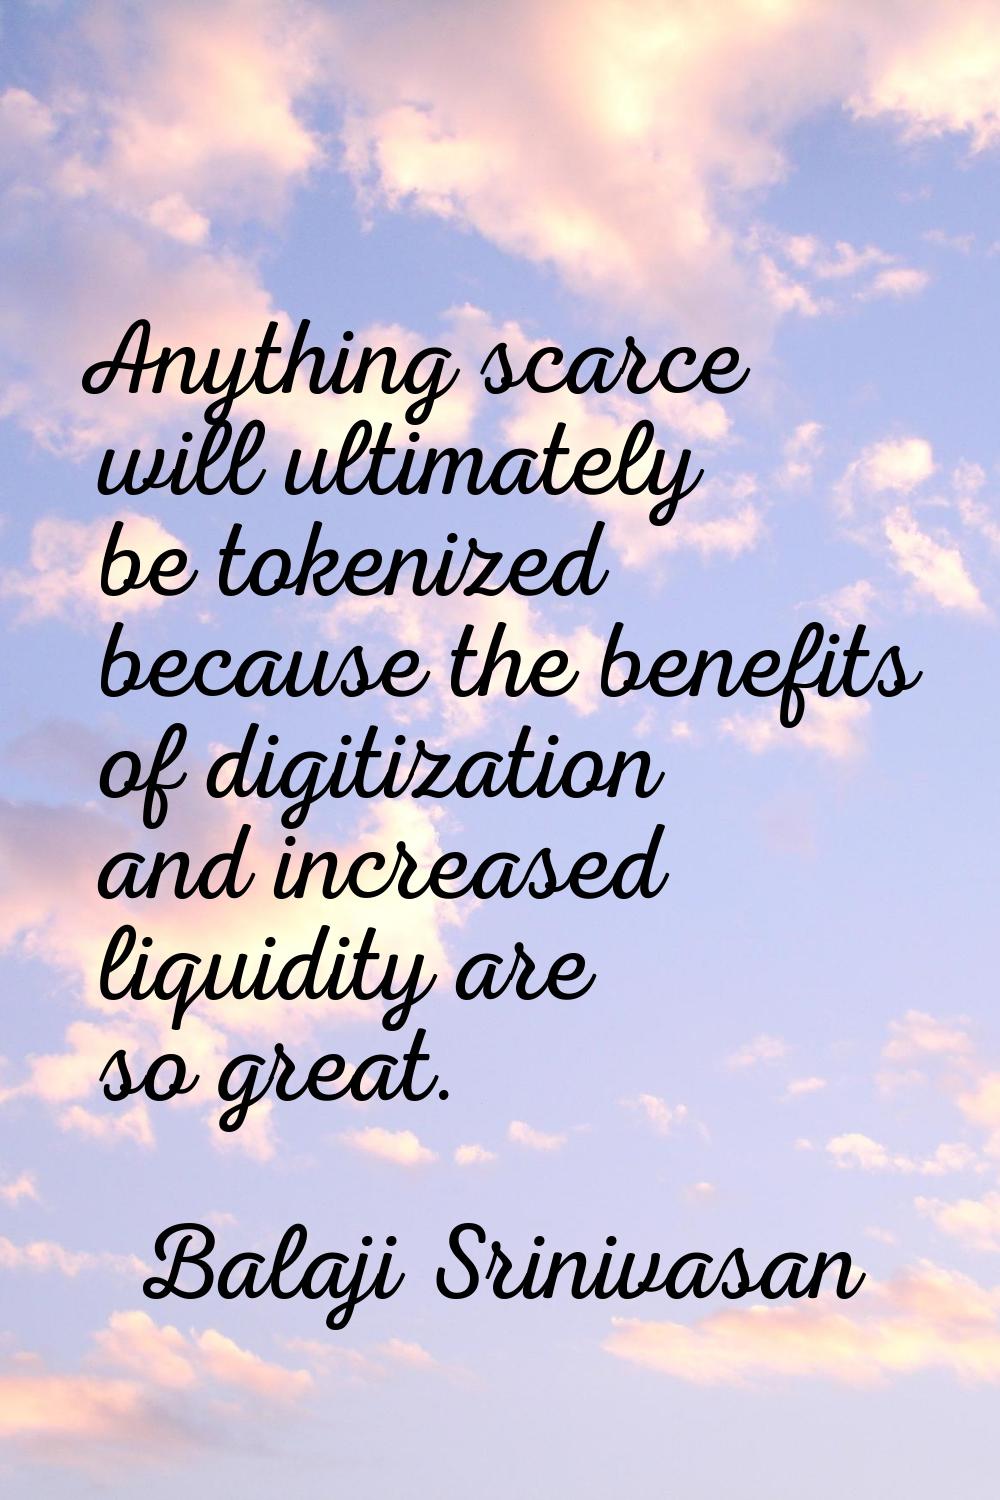 Anything scarce will ultimately be tokenized because the benefits of digitization and increased liq